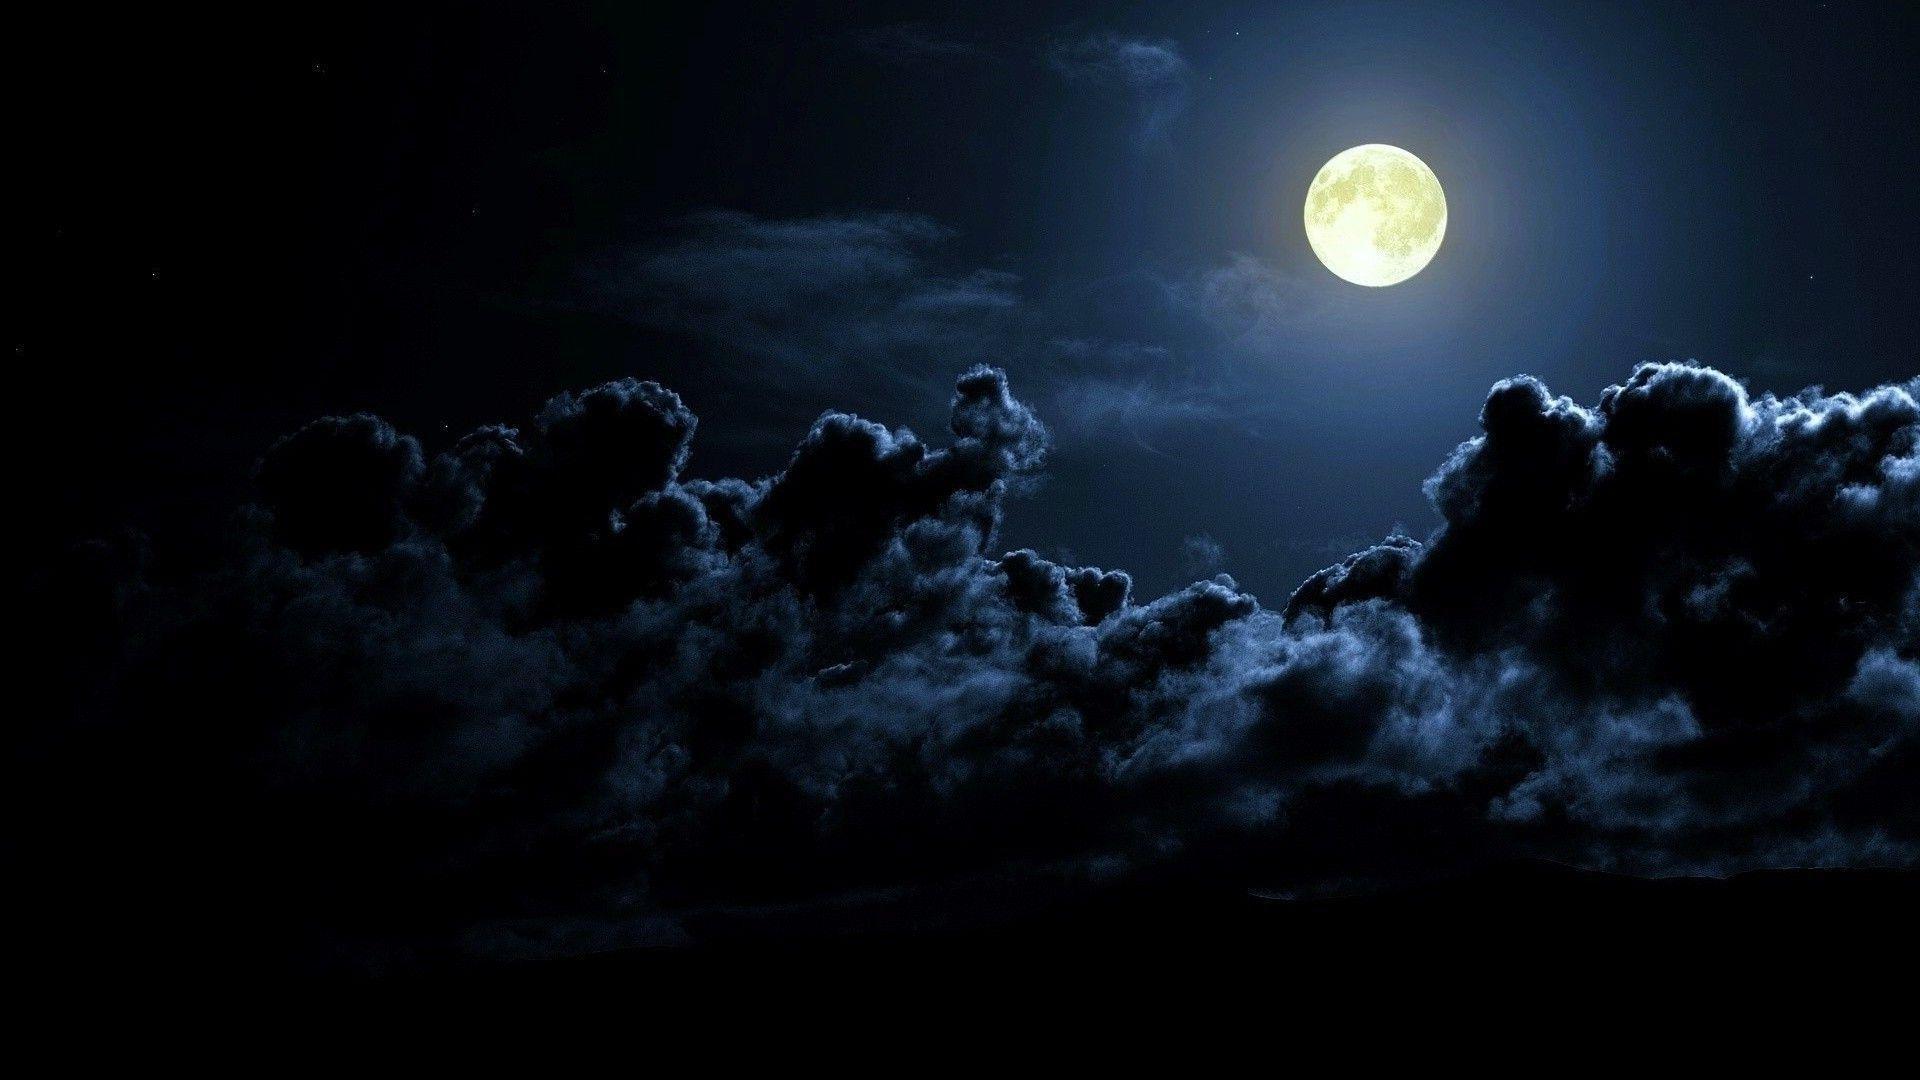 Moon Light. Night, Full HD Picture And Moon Picture